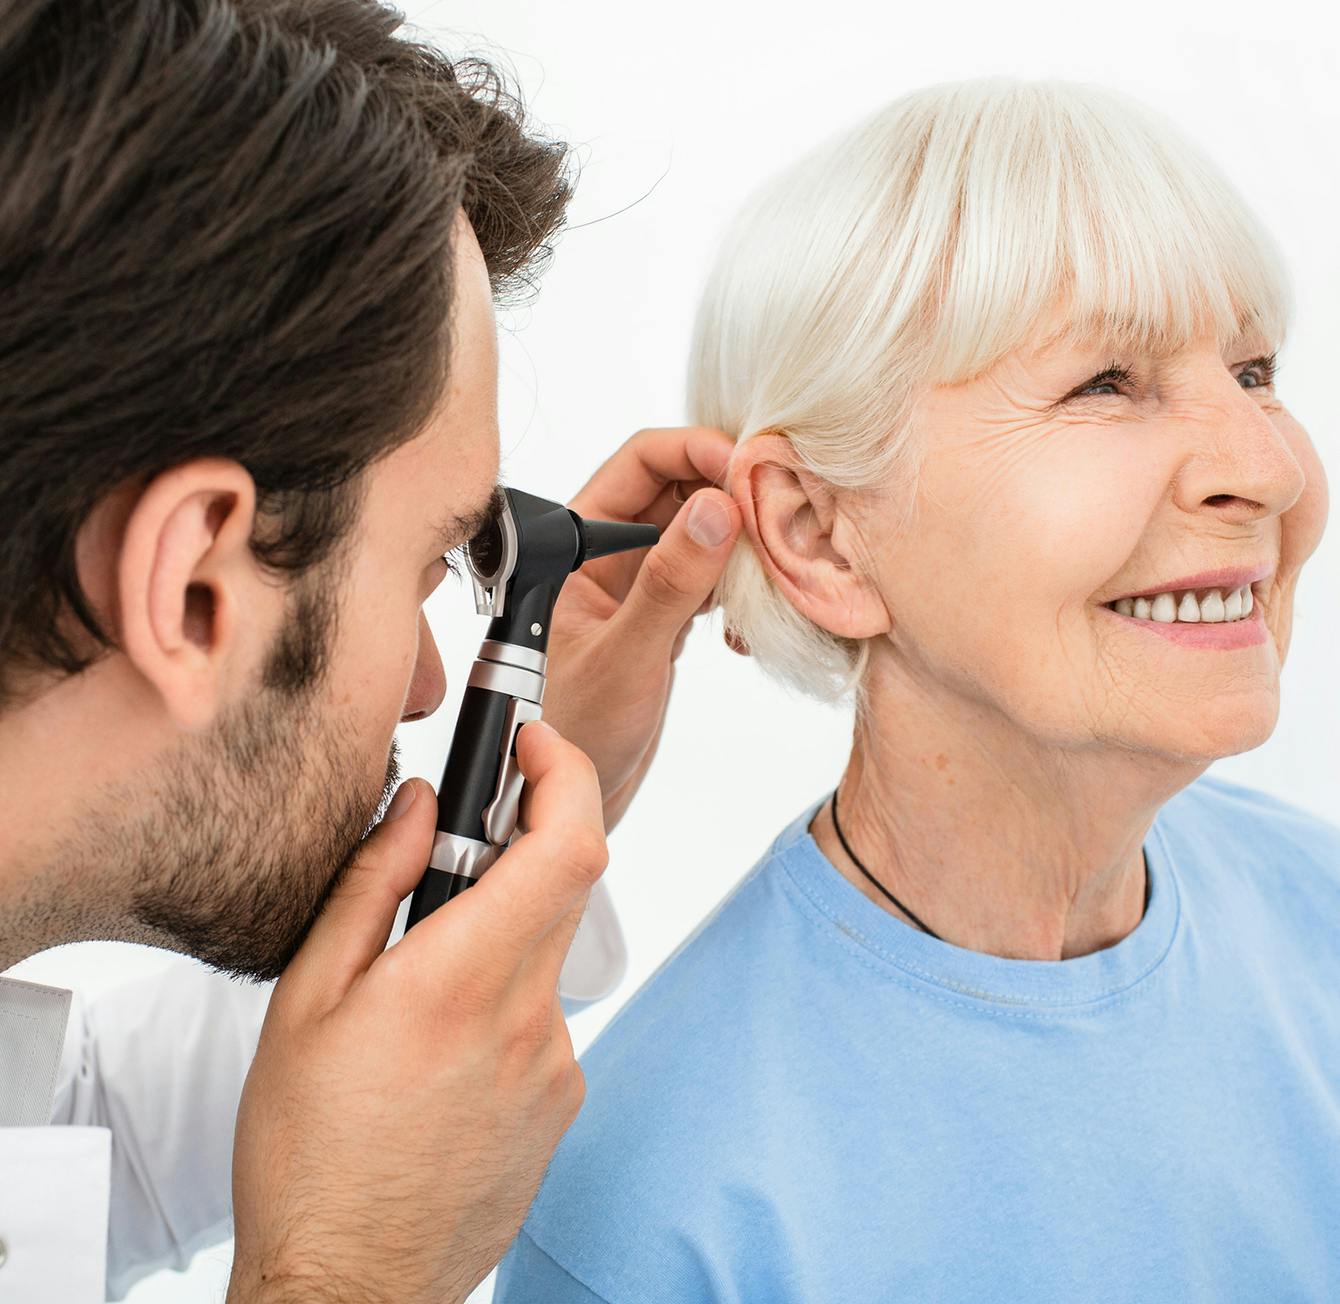 Male physician examing female patient's ear